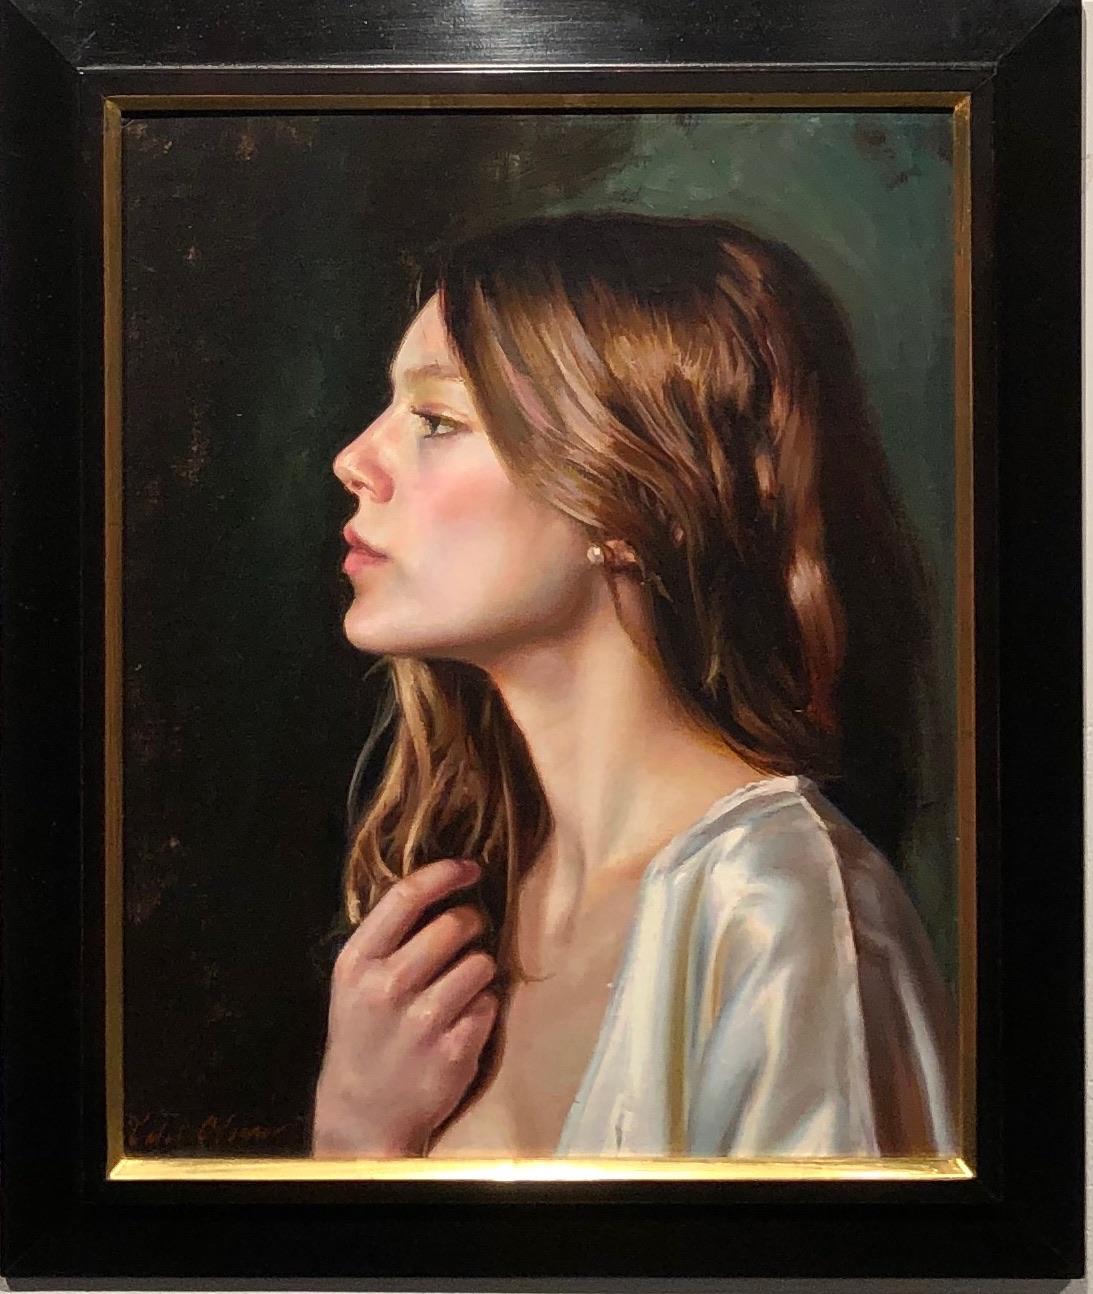 Untitled Portrait of a Female with Long Auburn Hair and a Silk Robe Oil on Panel - Painting by Caleb O'Connor